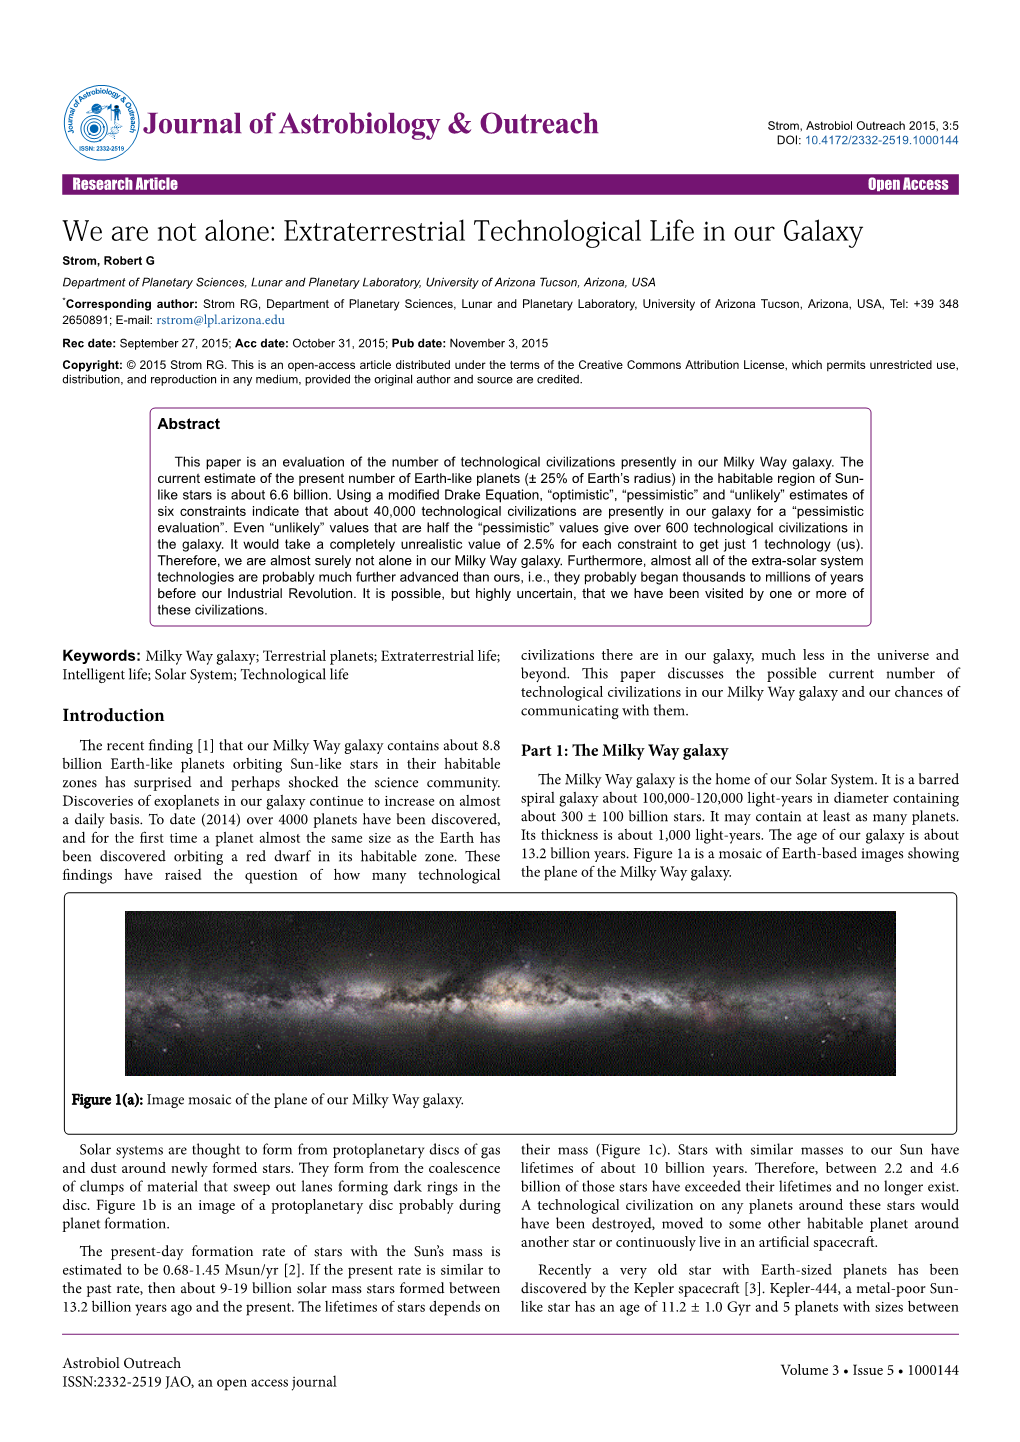 We Are Not Alone: Extraterrestrial Technological Life in Our Galaxy